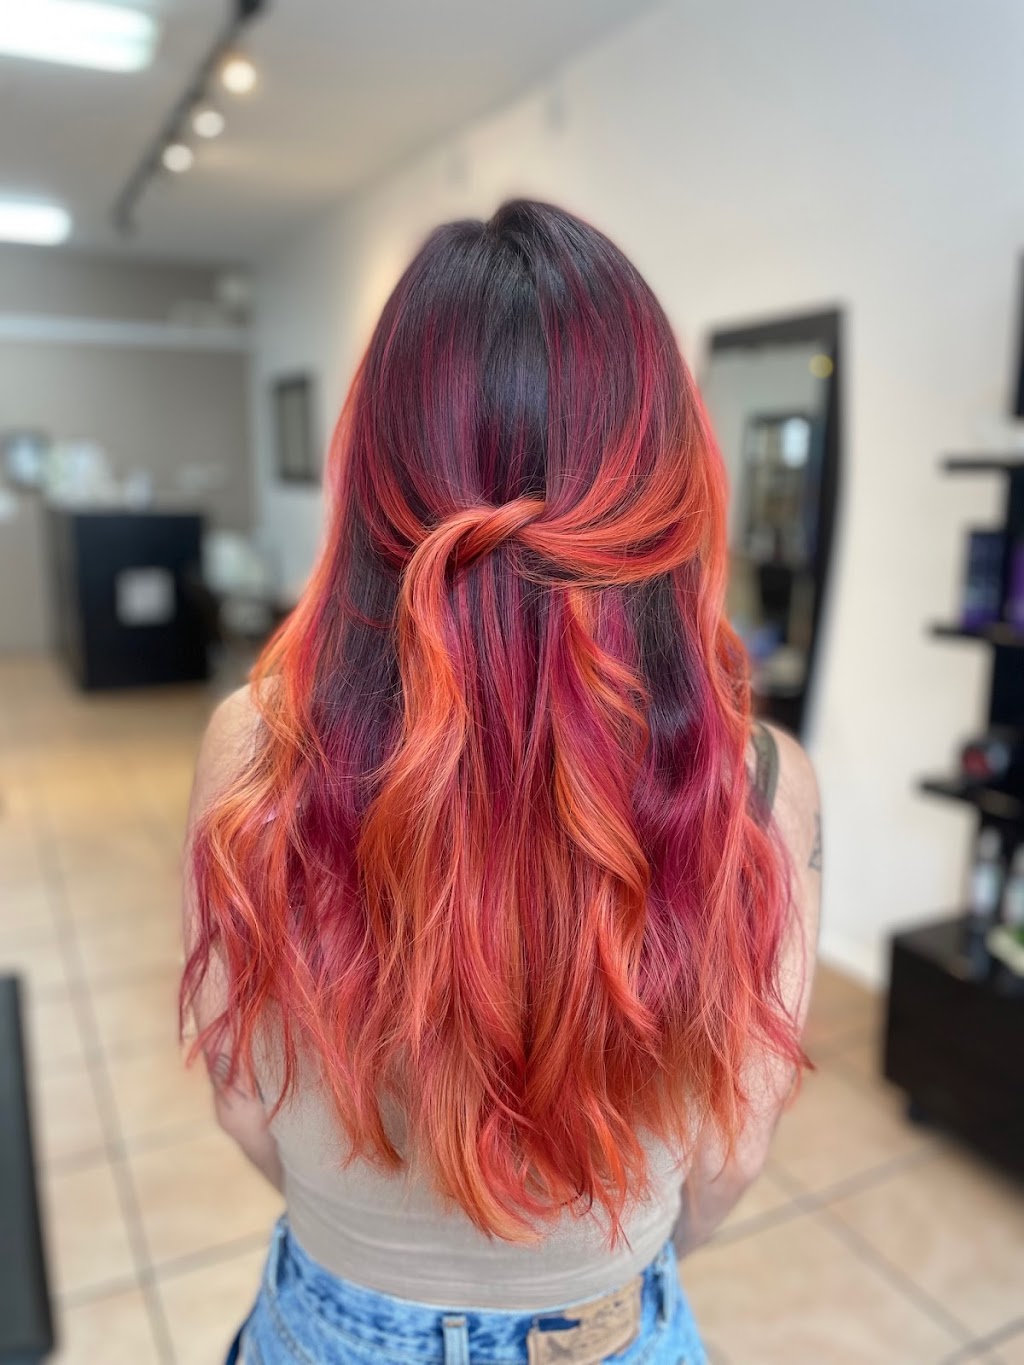 Conjured Hair Studio - hair care  | Photo 1 of 10 | Address: 1593 US-22 Suite 130, Watchung, NJ 07069, USA | Phone: (908) 312-3572